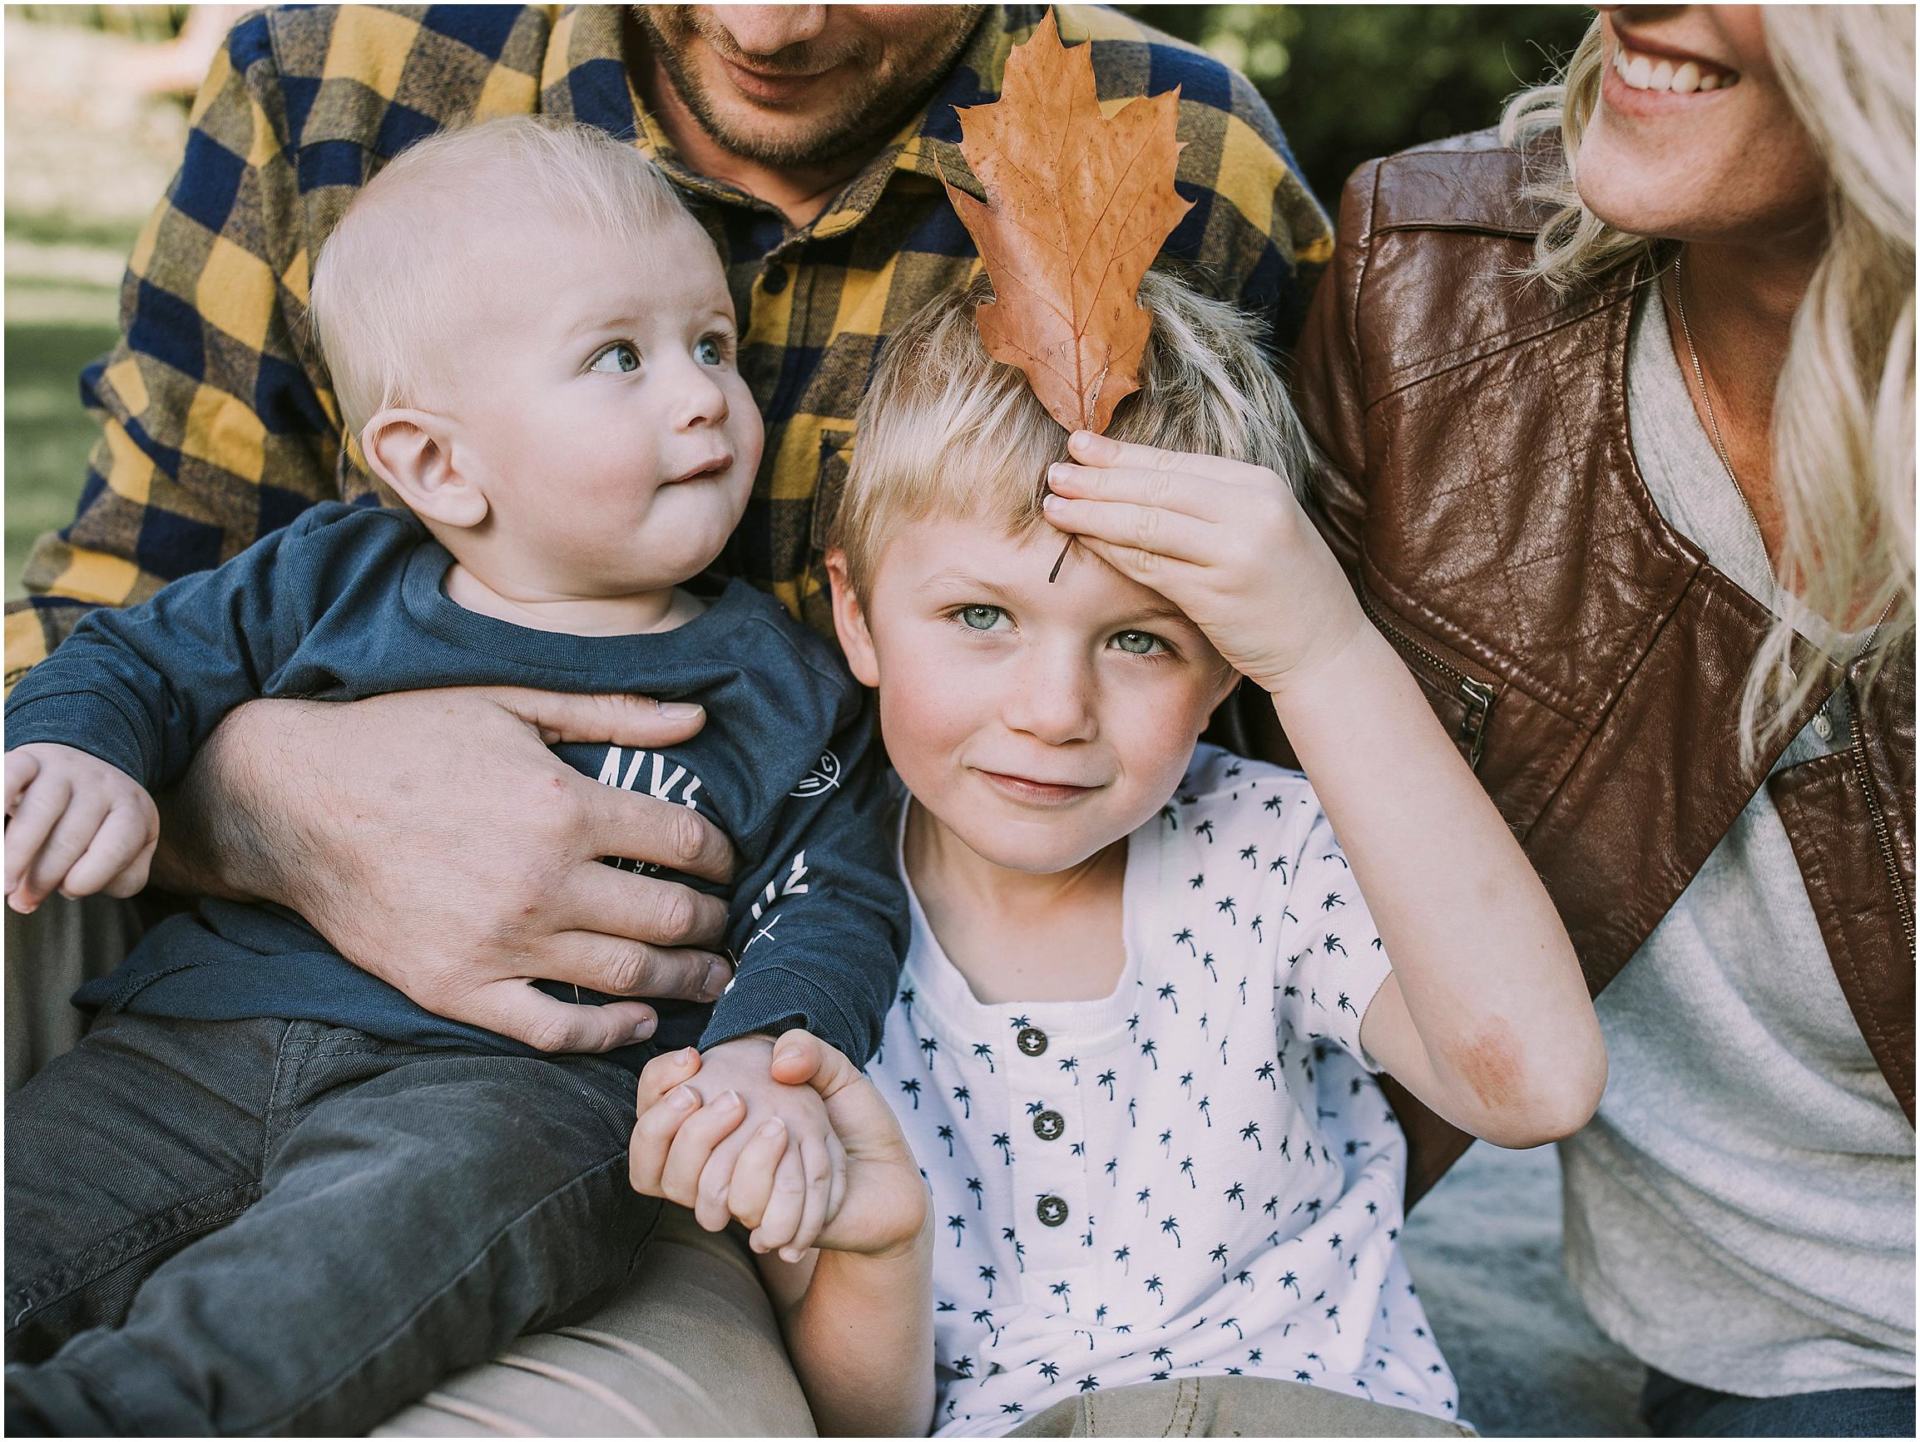 Charlotte Kiri Photography - Family Photography of a couple holding their two boys as the youngest looks up to the mother, and the eldest holds an autumn leaf up to his forehead playfully, as he holds his brother's hand in Wanaka, New Zealand.